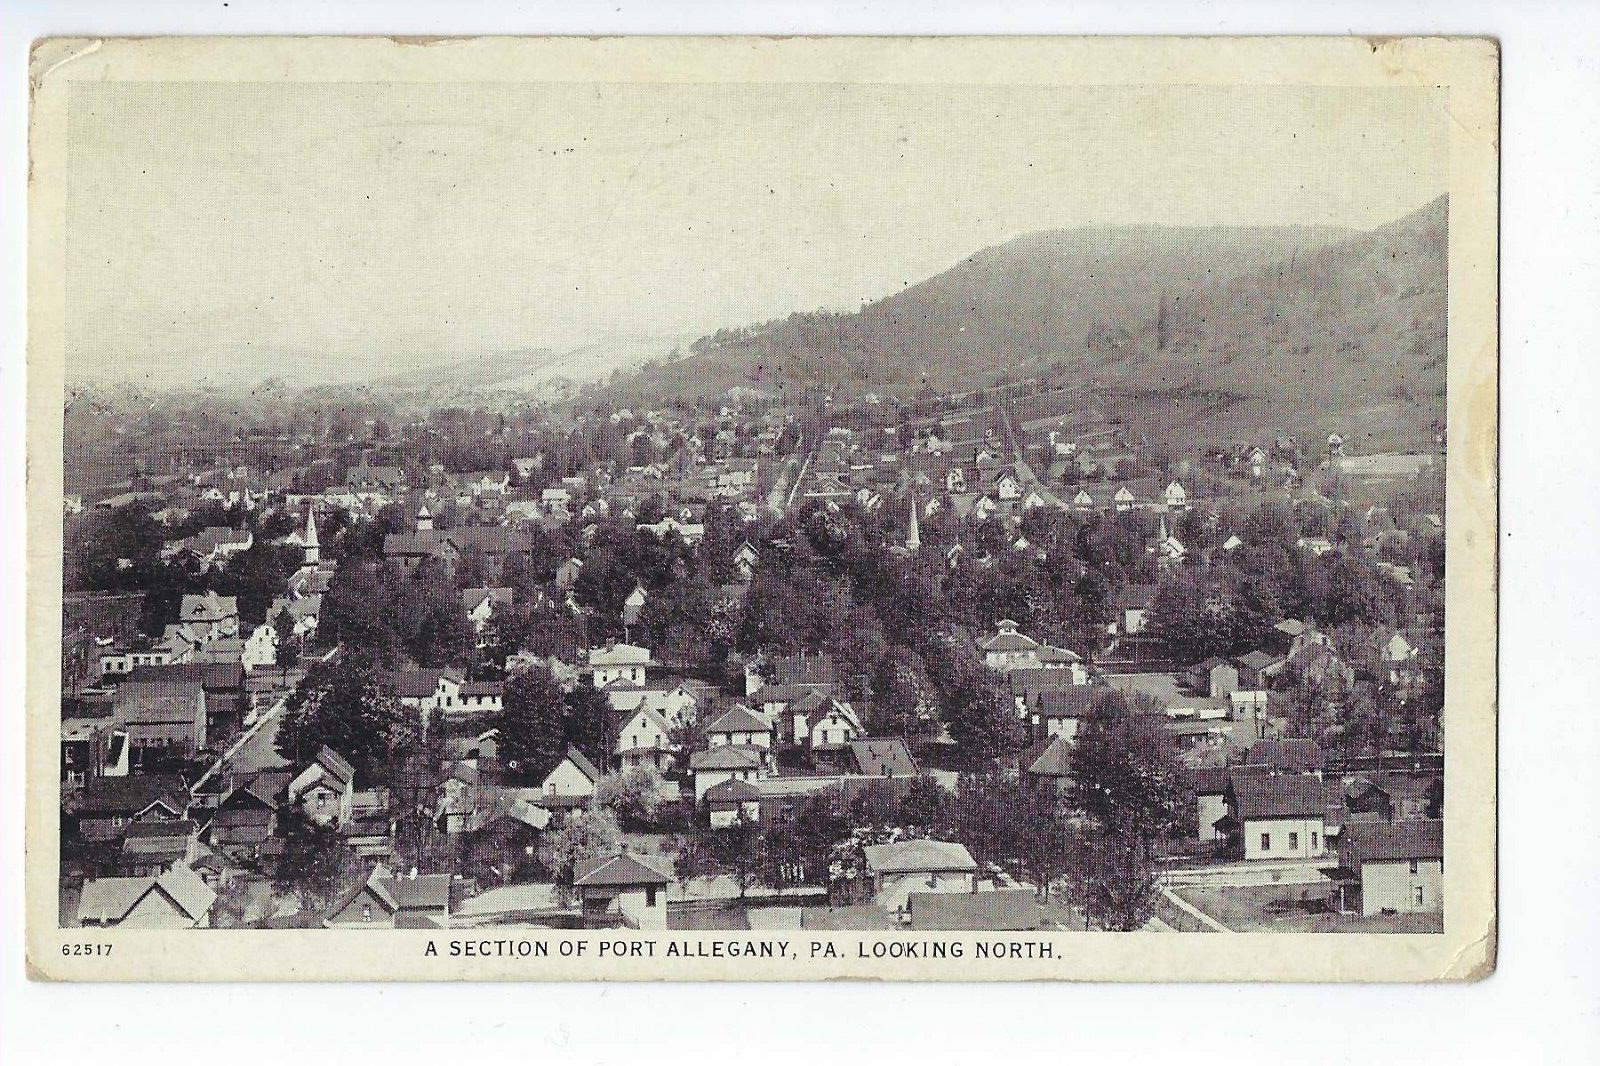 A Section of Port Allegany Looking North Postcard Pennsylvania Flag Cancel c1925